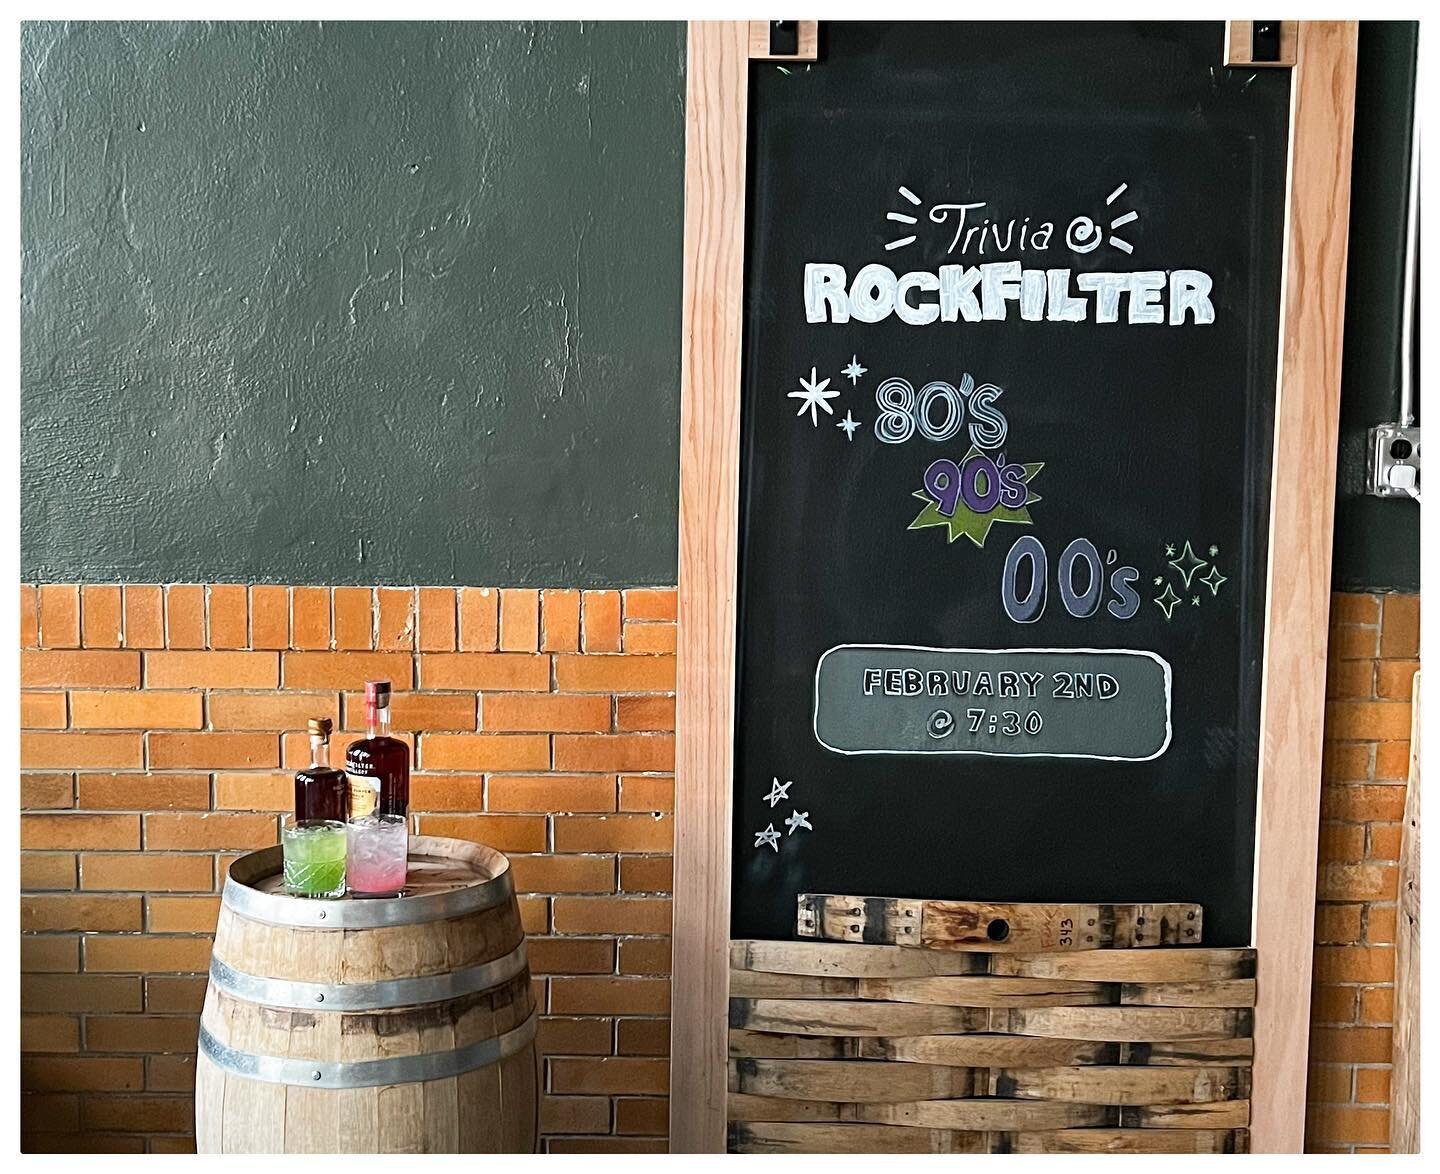 It&rsquo;s trivia week! Come test your knowledge of the 80&rsquo;s 90&rsquo;s and 00&rsquo;s! Bring a team, or join one when you get here! We&rsquo;re open Thursday &amp; Friday 4-10 and Saturday 12-10. #rockfilterdistillery #cheers #trivia #cocktail